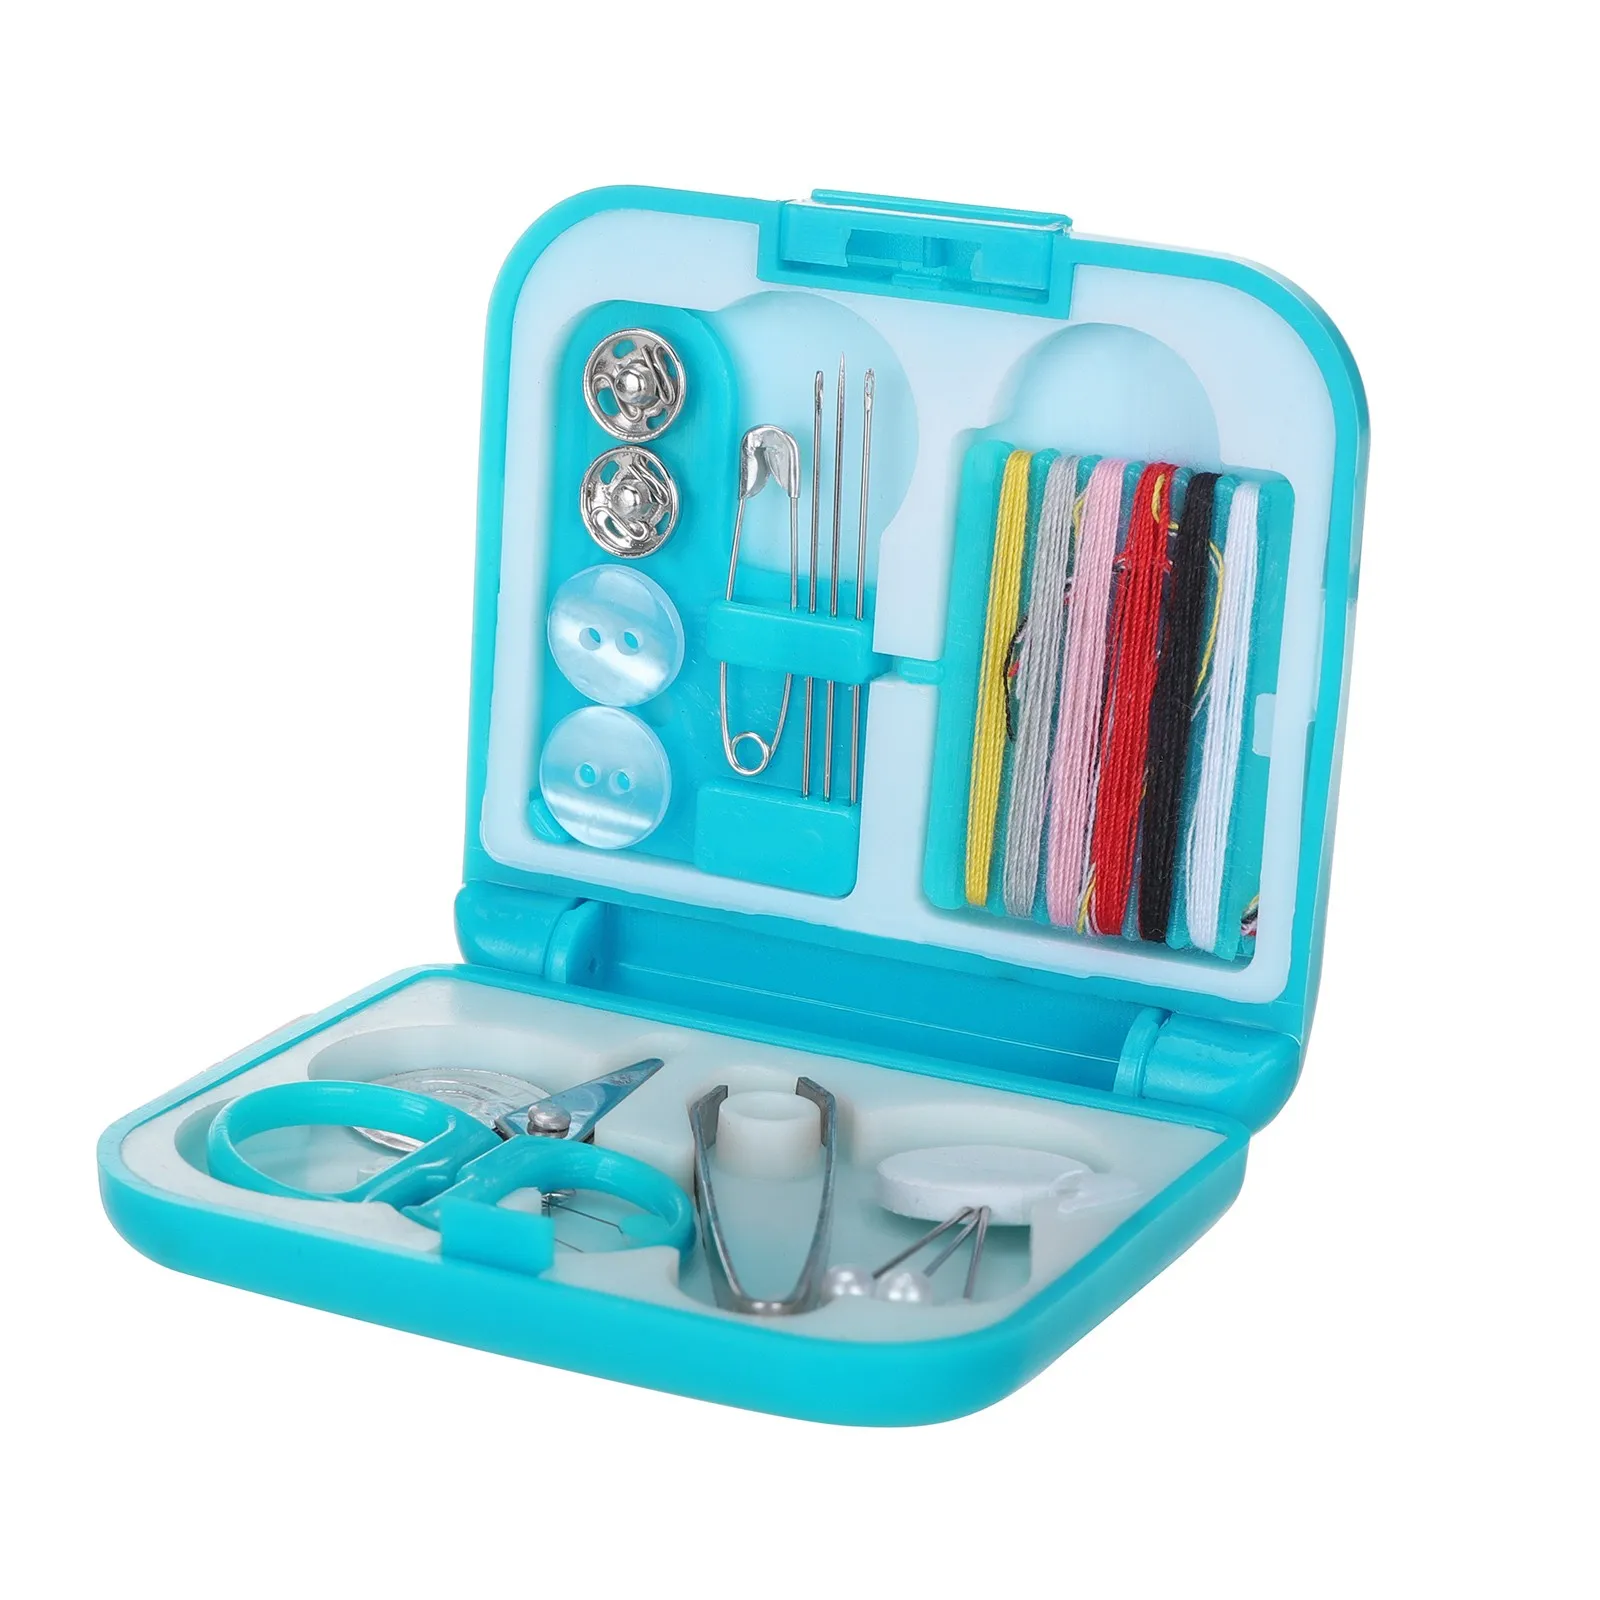 Sewing Kit Tools Portable Mini Travel Case Colors Needle Thread DIY Home Travel 